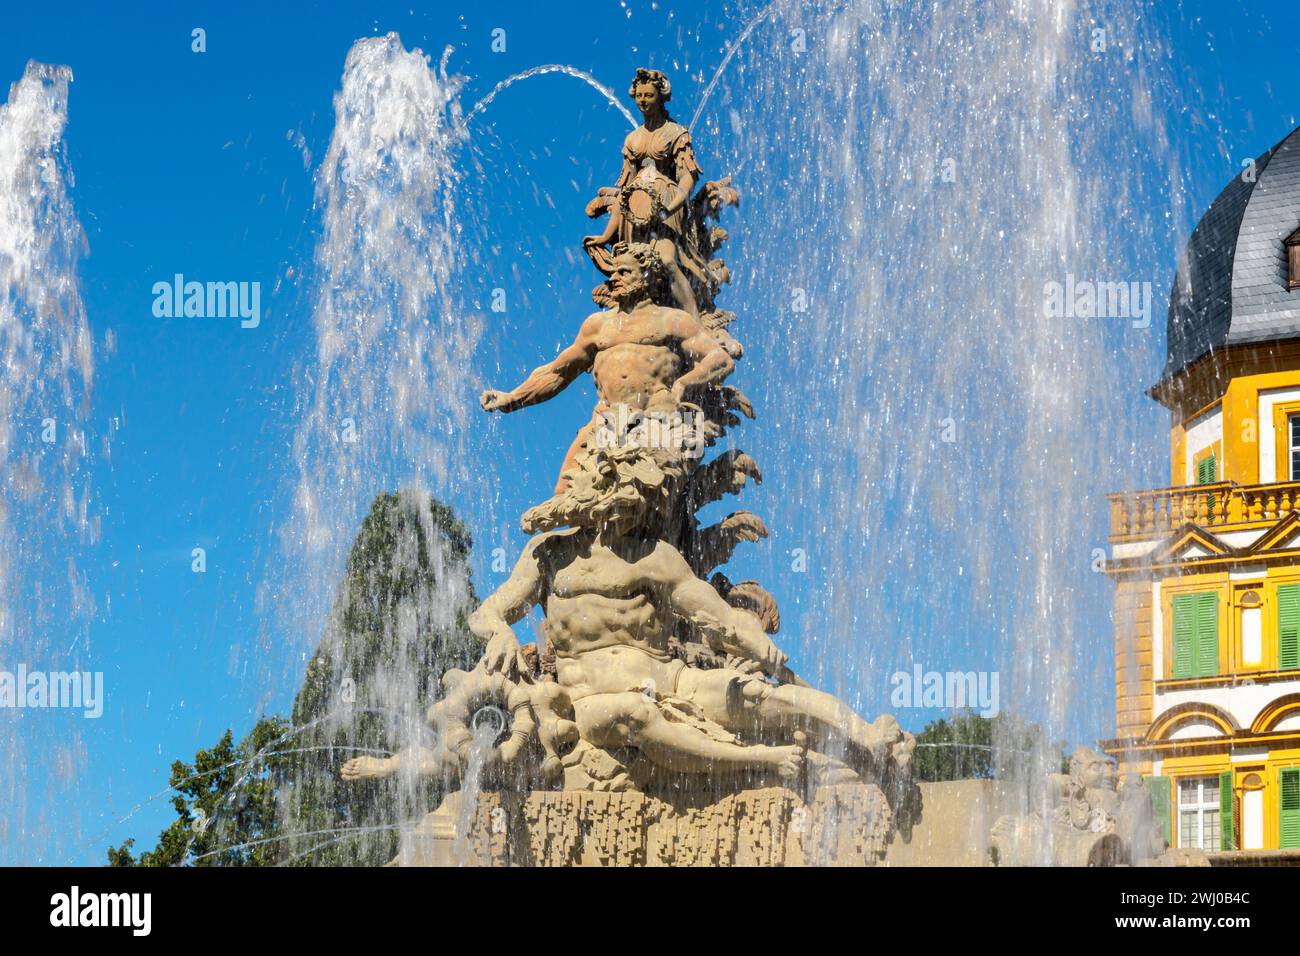 Fountain at the back of Seehof Castle, Germany Stock Photo